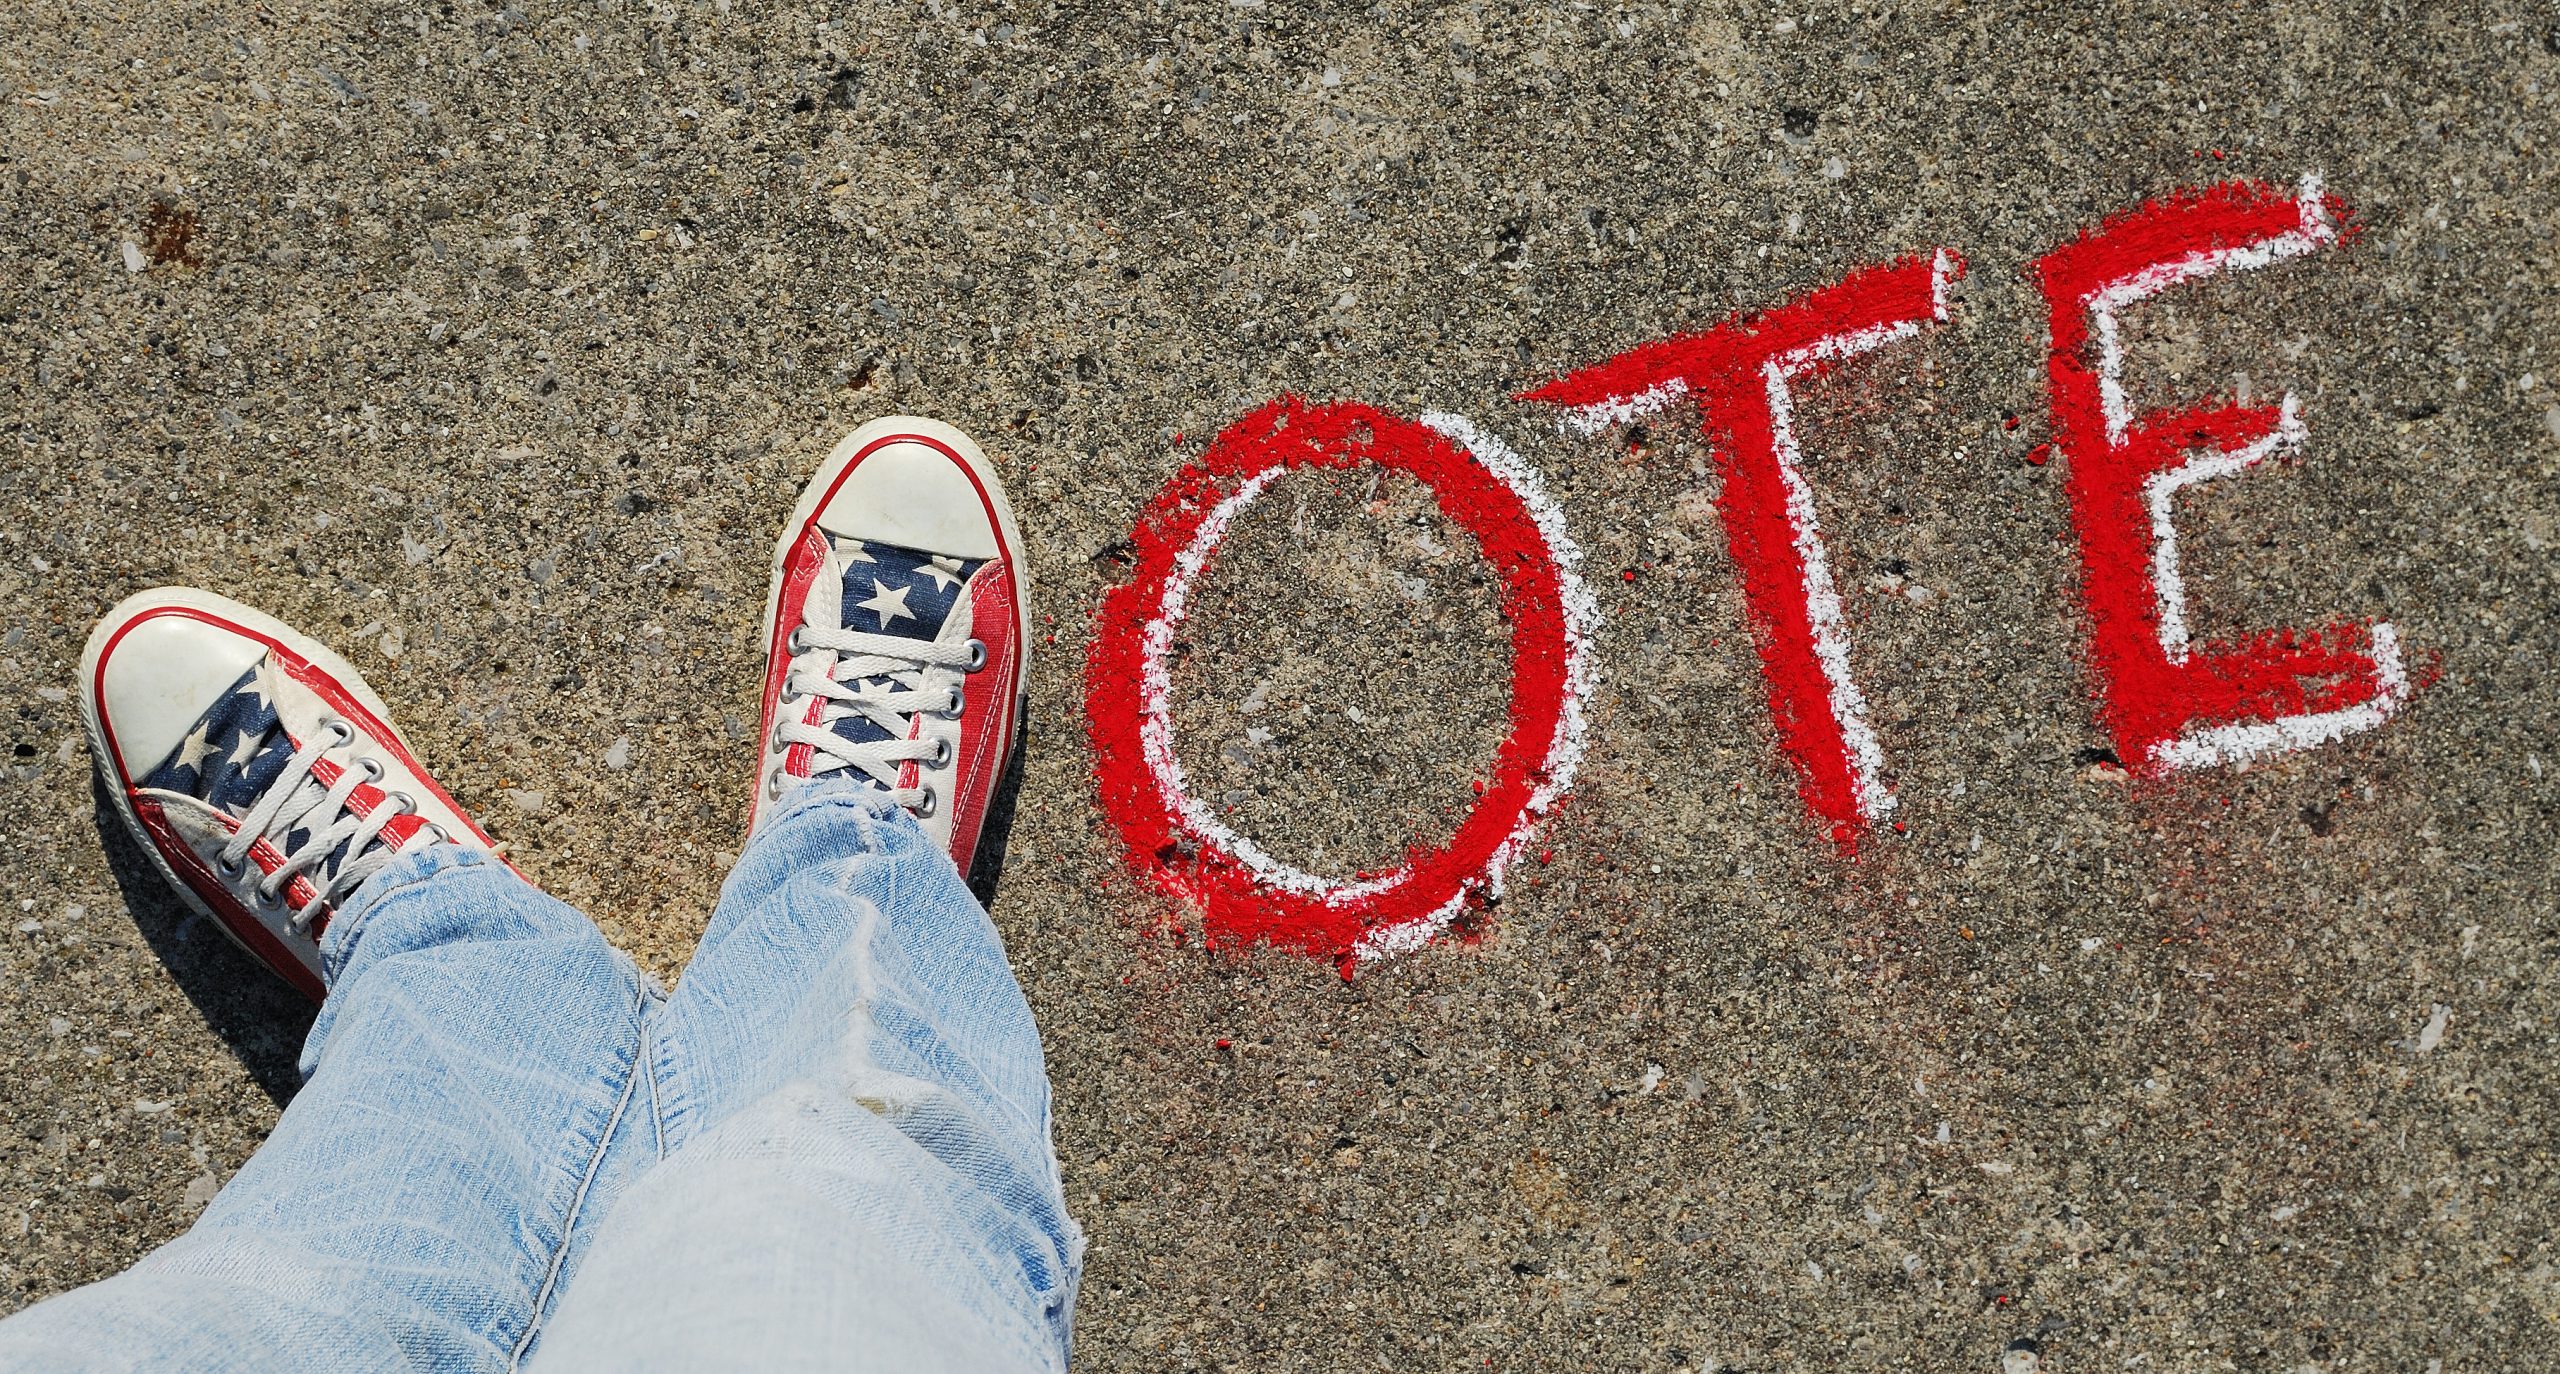 The word "vote" is written on the ground, with two sneakered feet used for the "v"